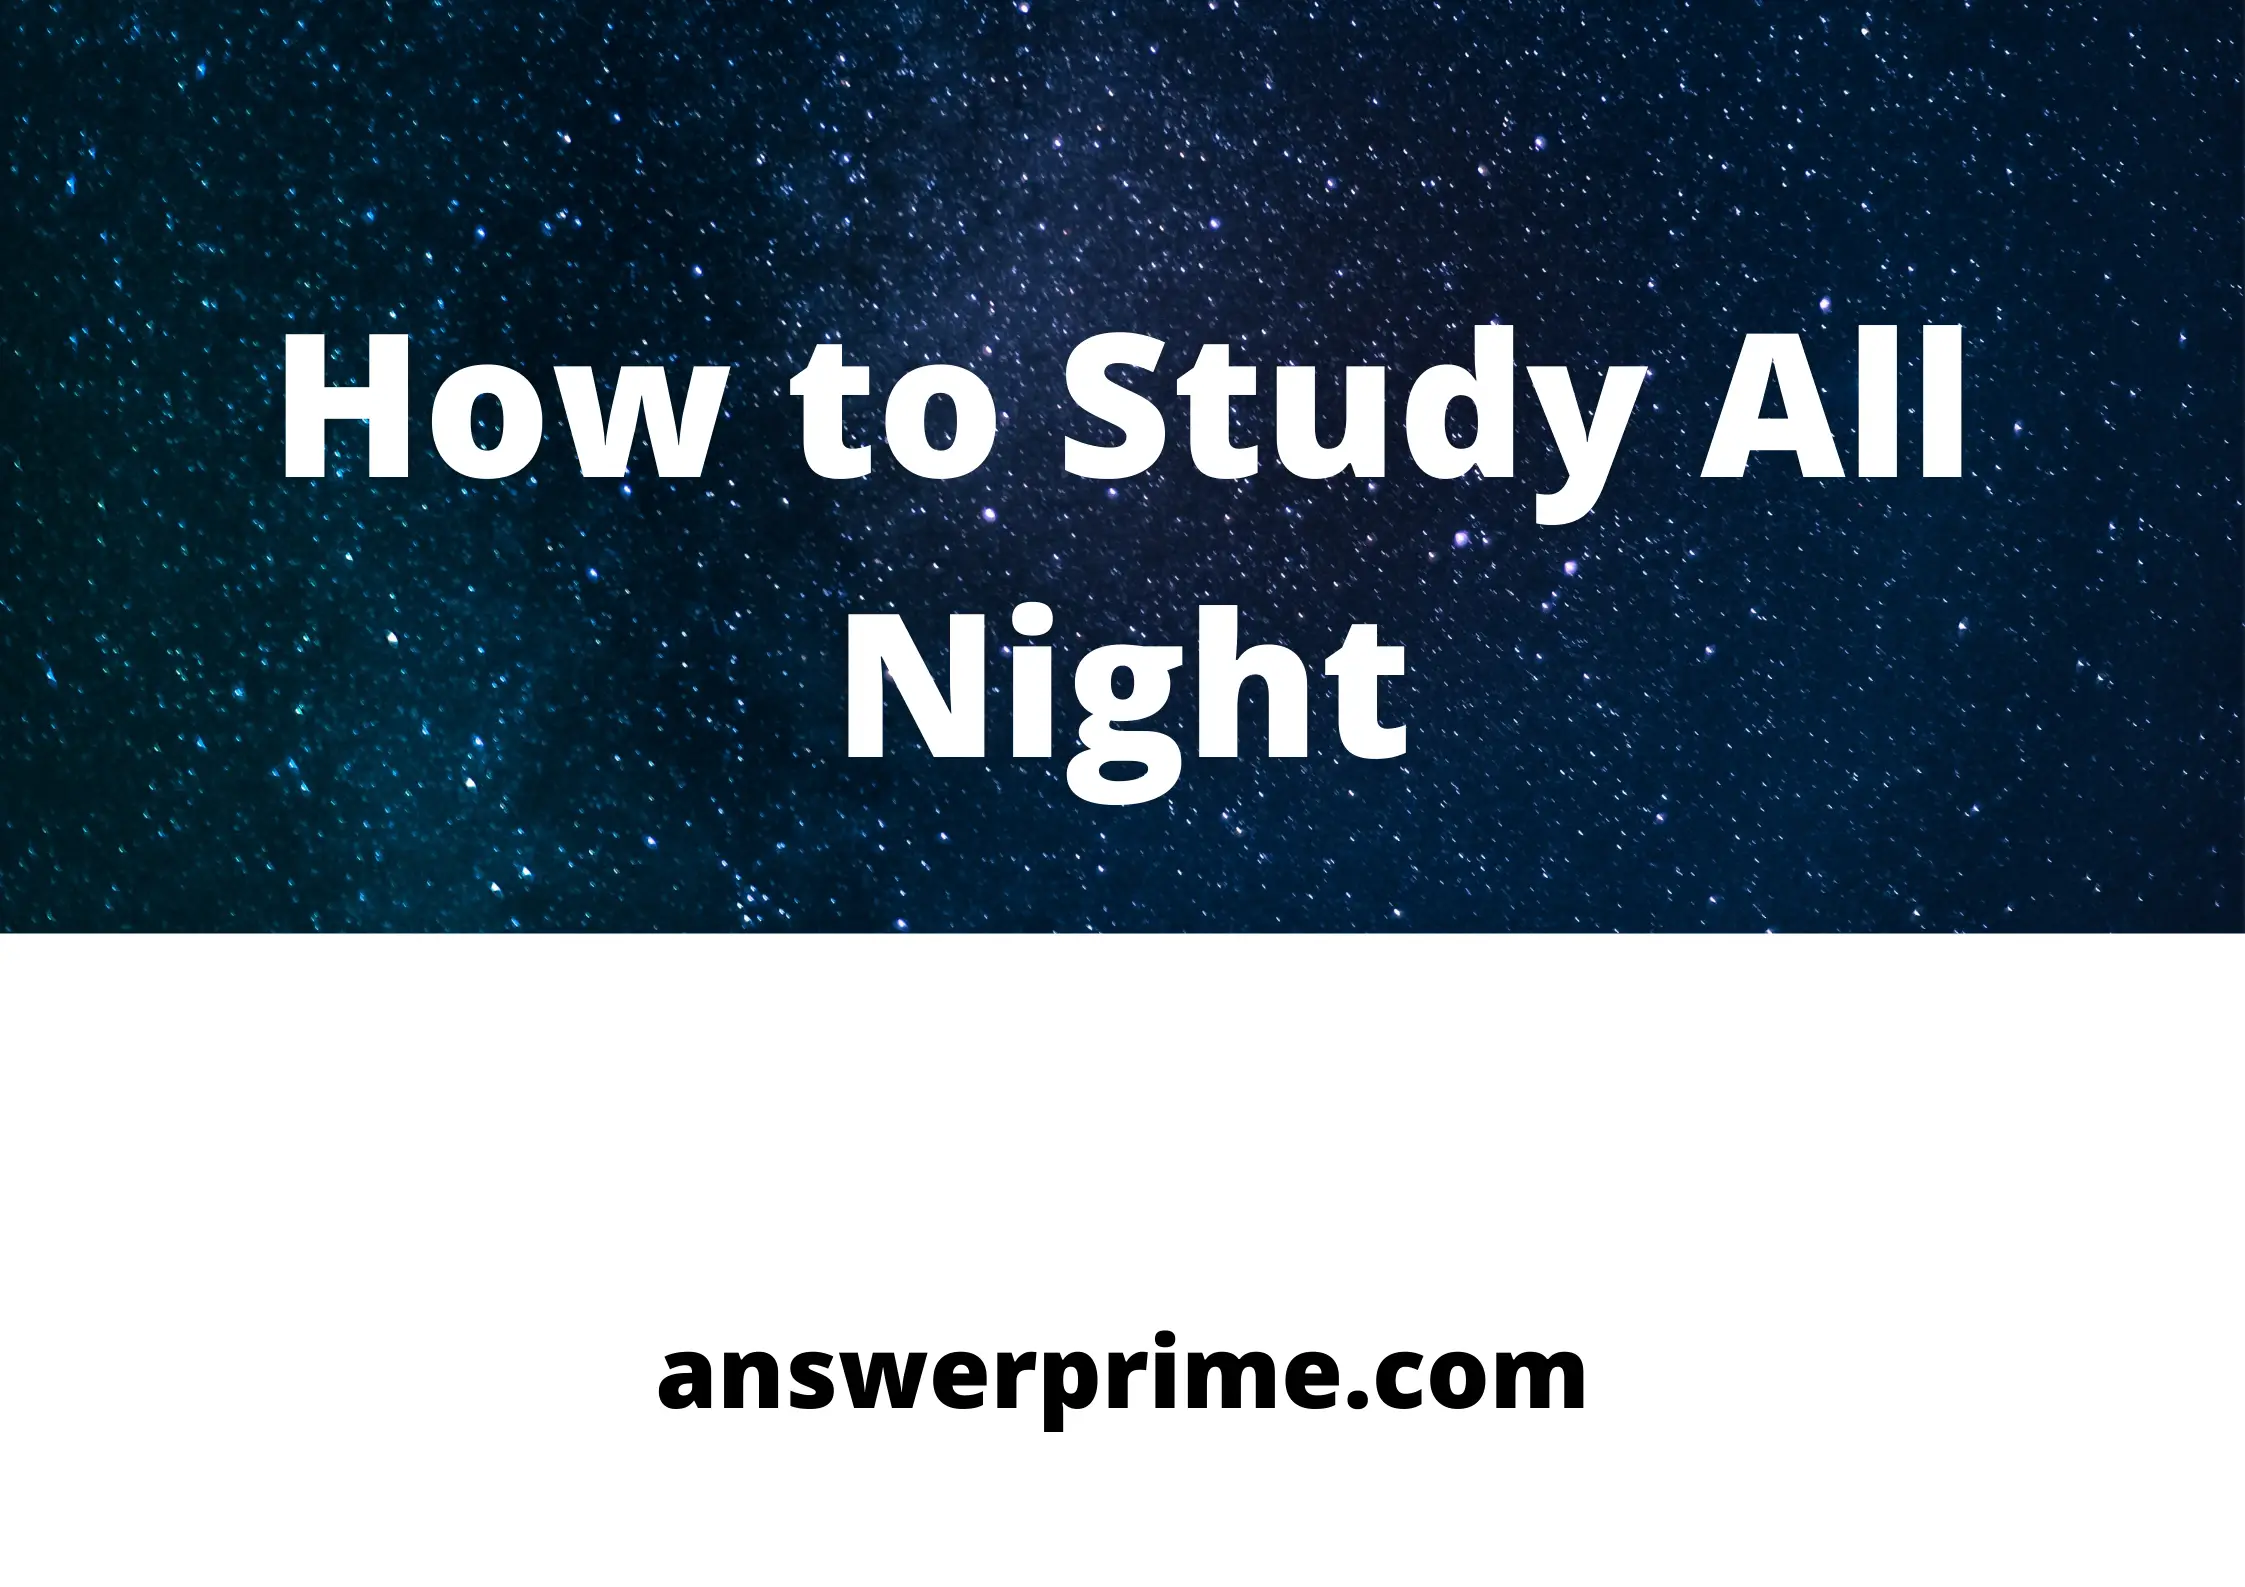 How to Study All Night